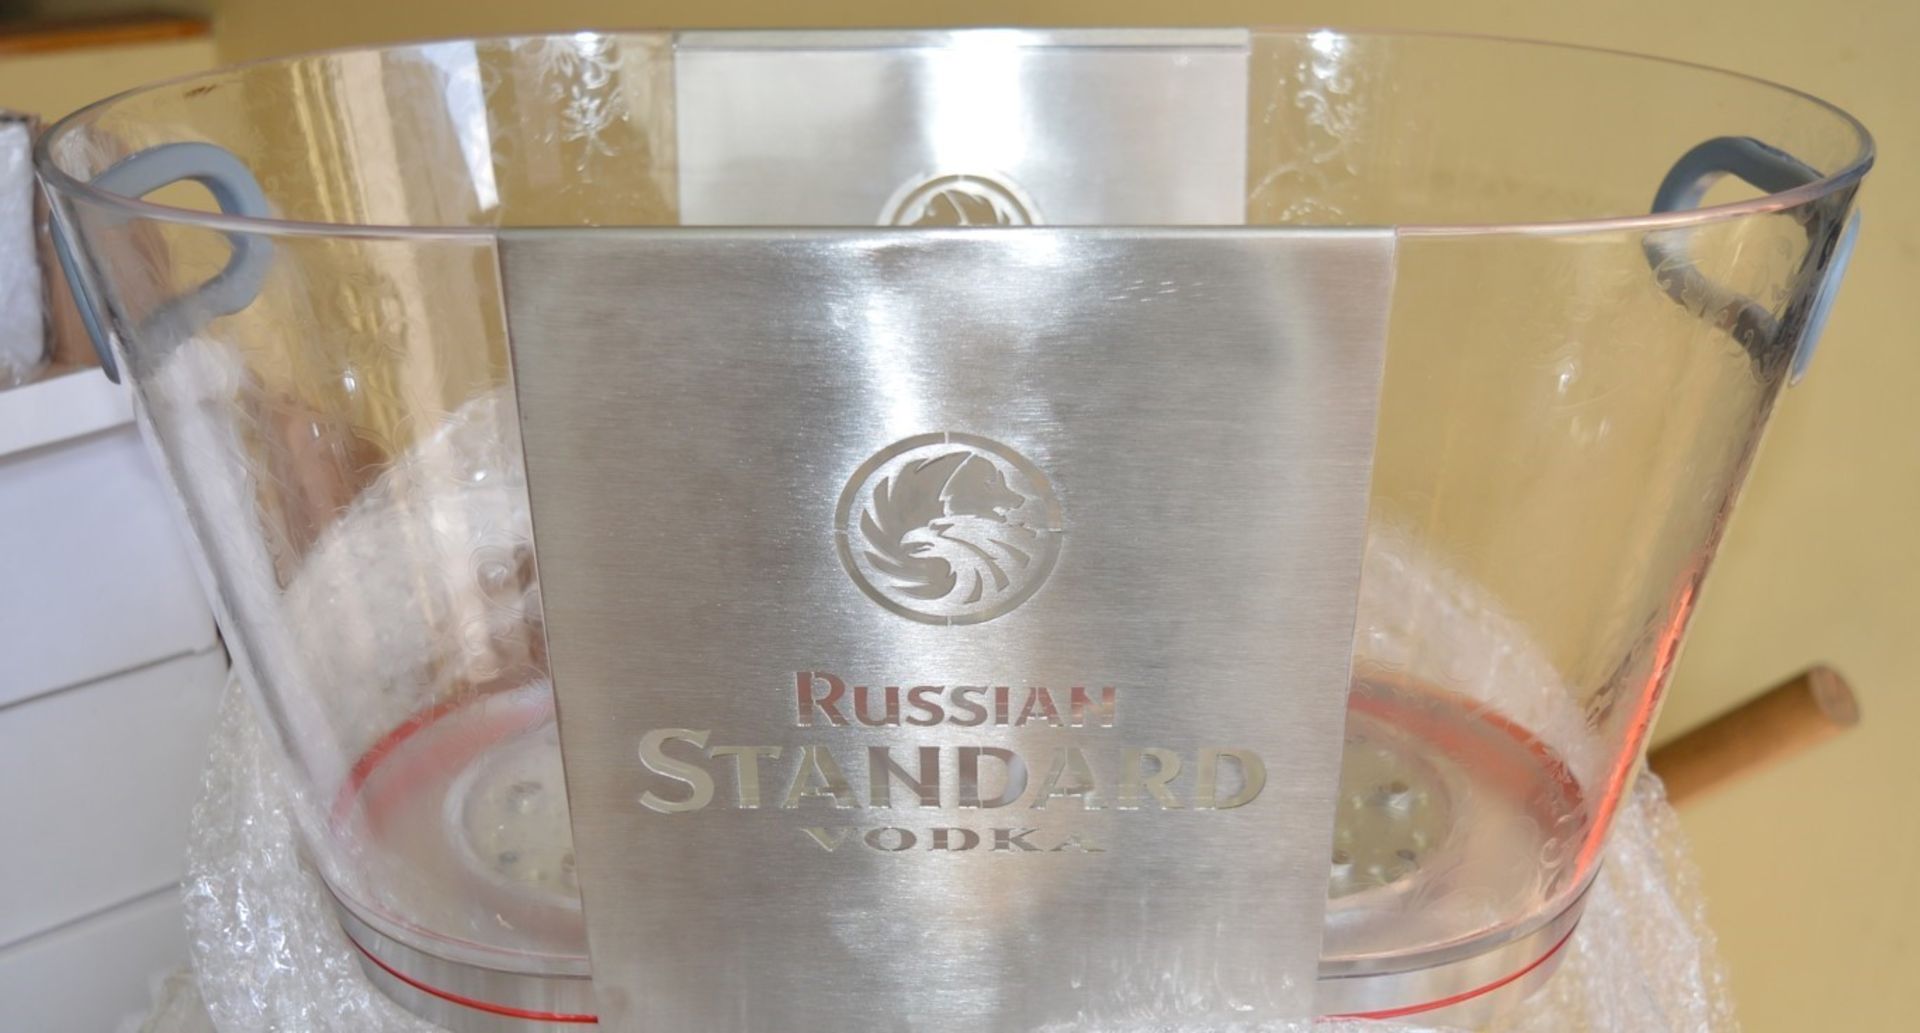 1 x Russian Standard Vodka Promotional Multi Bottle Bar Cooler With LED Lights - Features Two